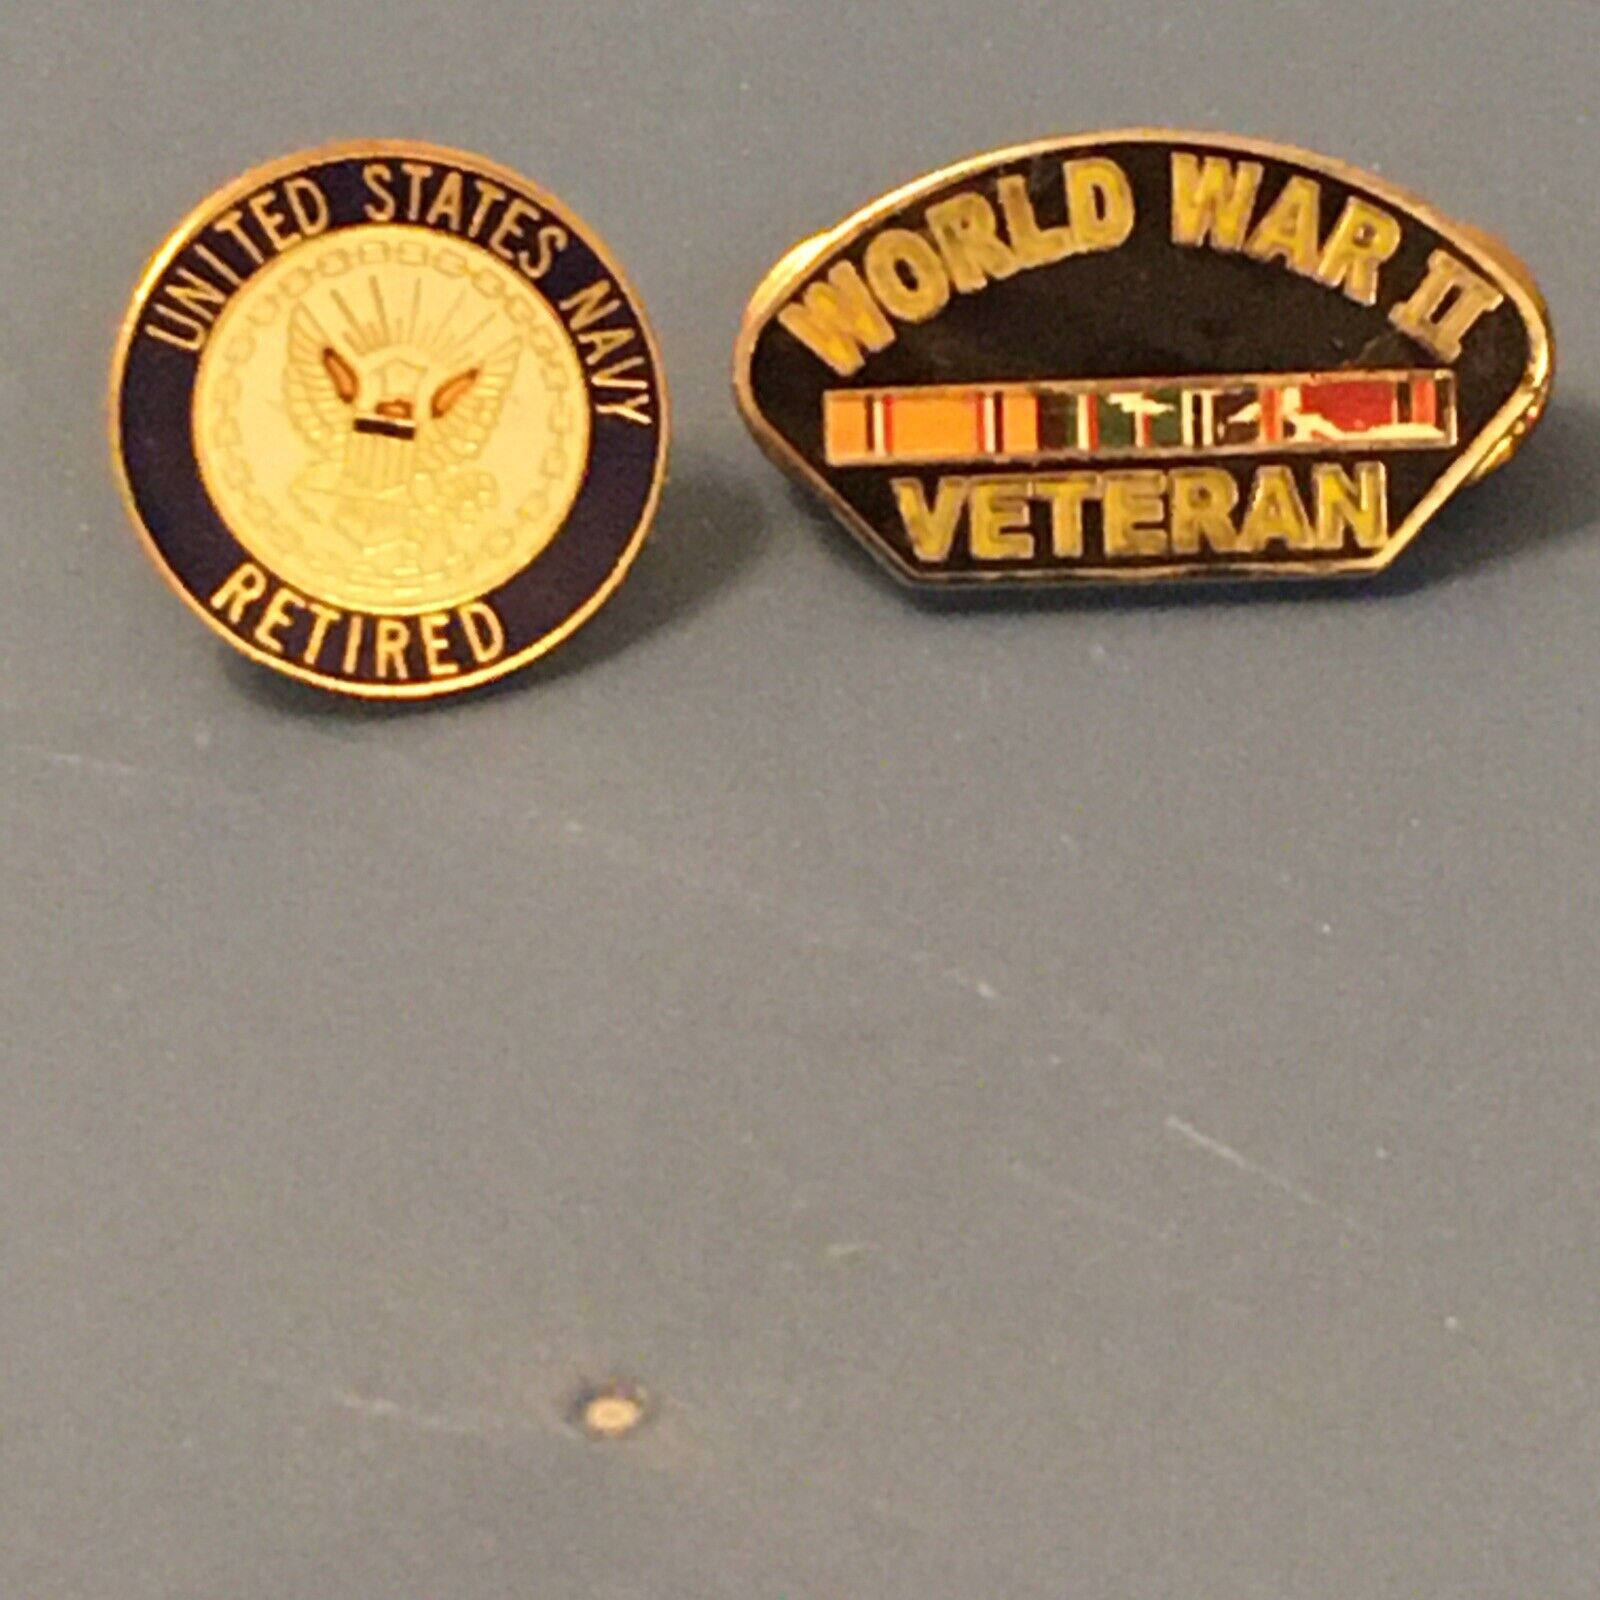 WWII Veteran With Ribbon and United States Navy Retired Pins